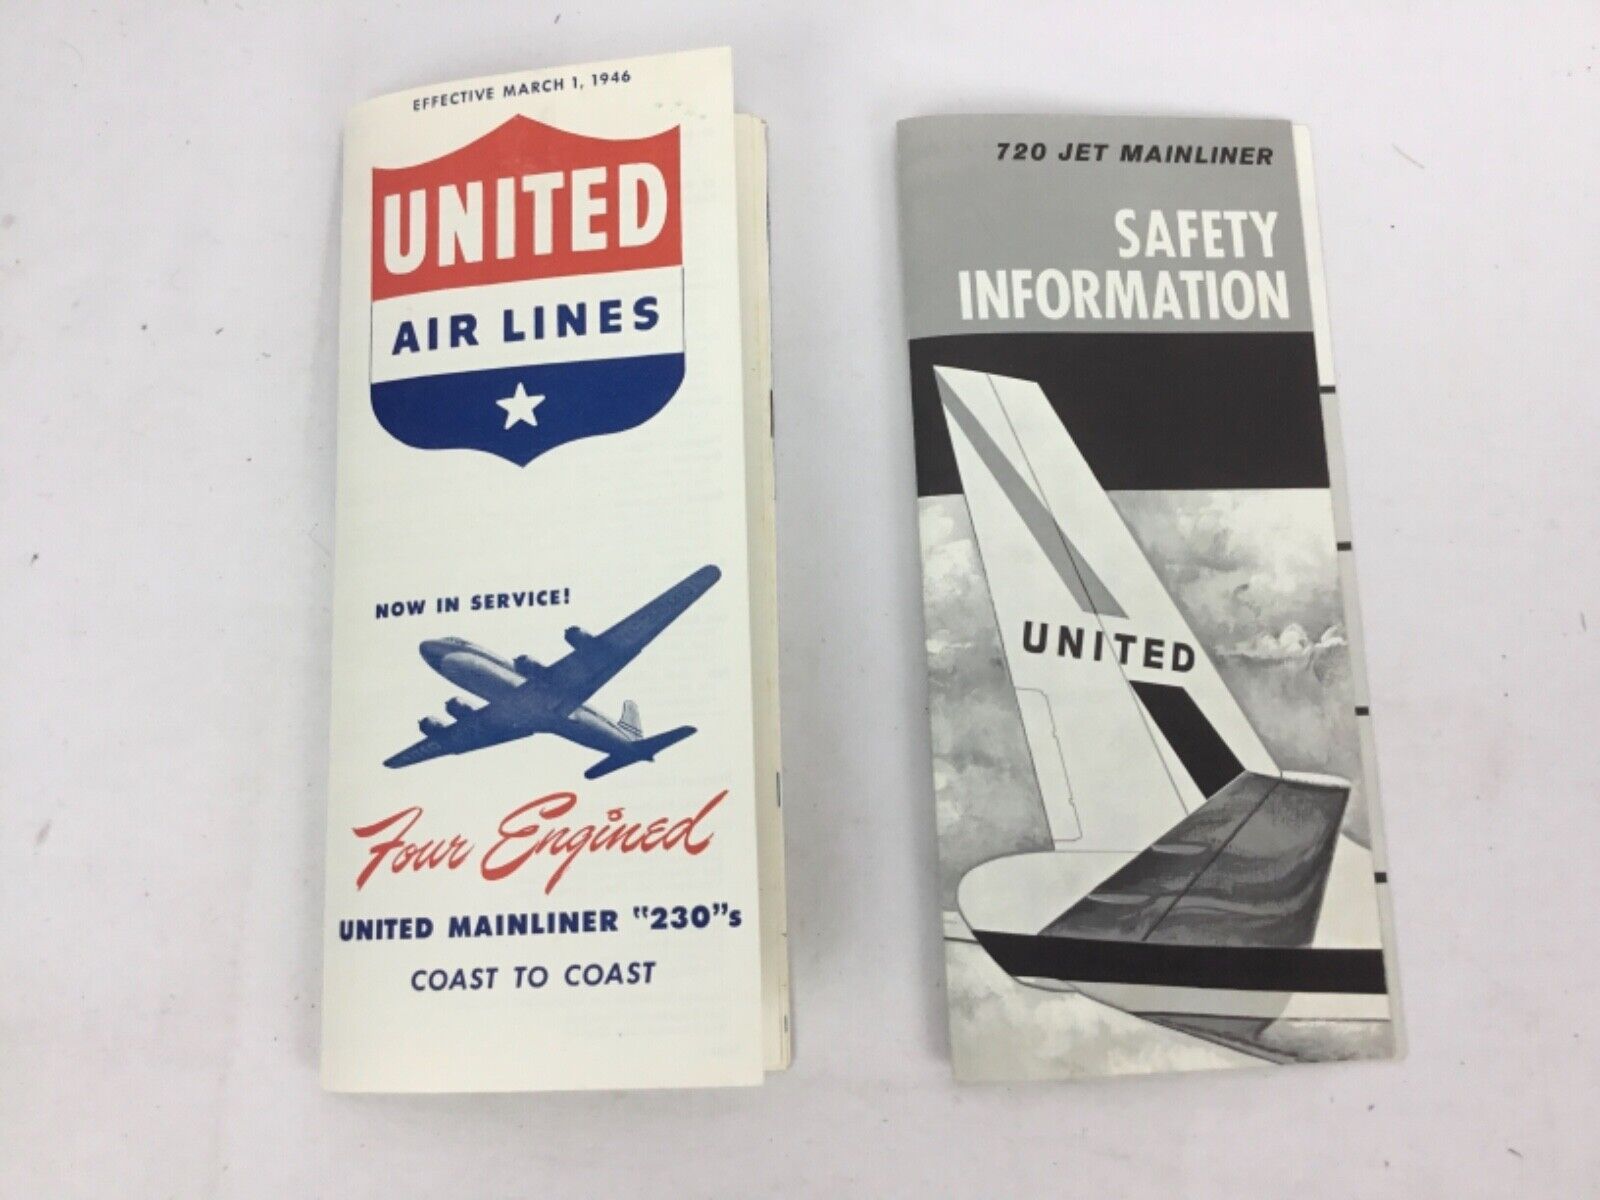 UNITED AIR LINES MARCH 1, 1946 TIMETABLE AND 11/61 SAFETY INFORMATION FILDER